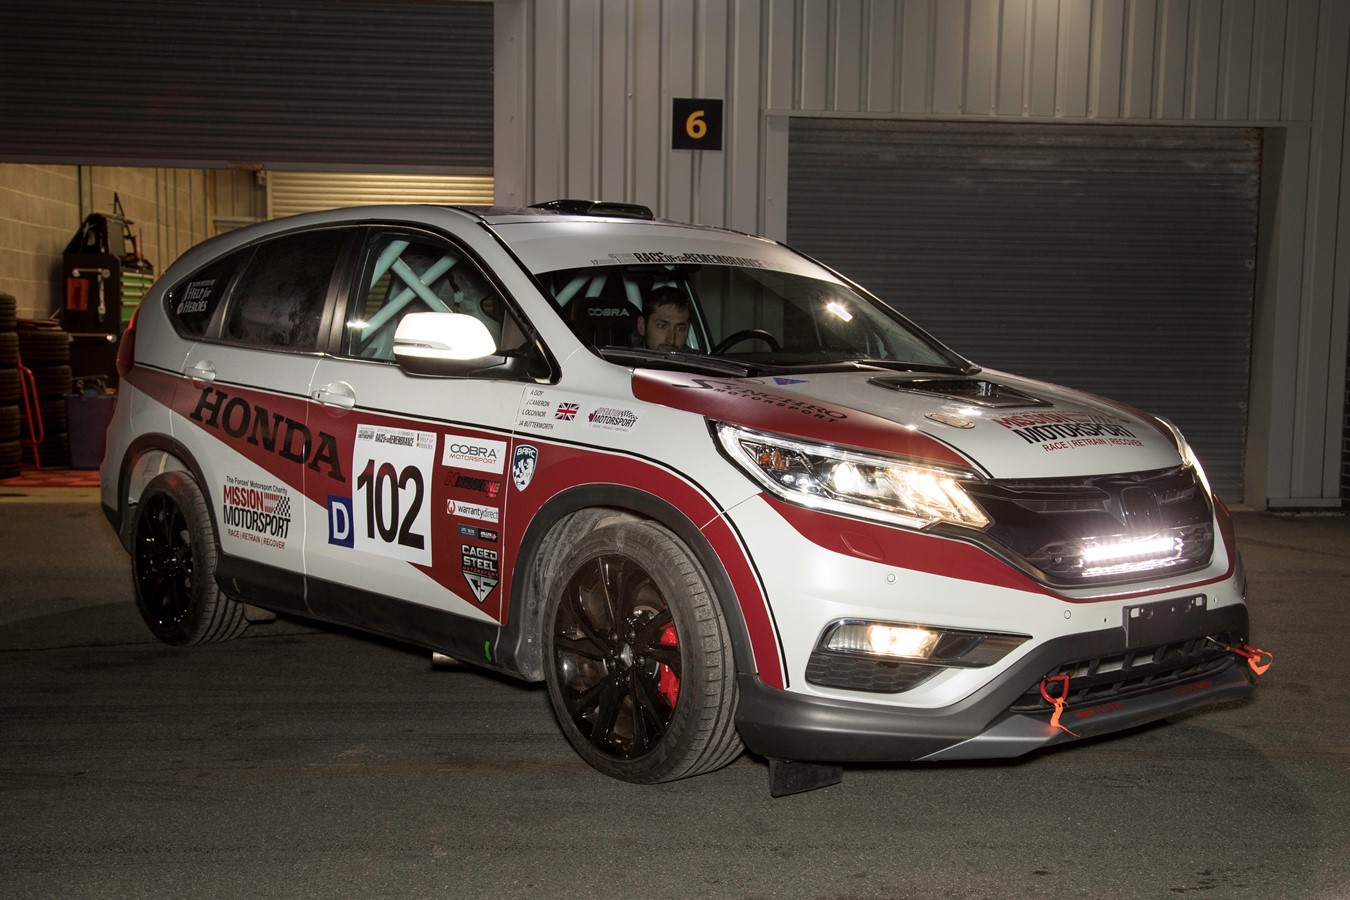 Honda UK and Mission Motorsport create first ever CR-V diesel race car for Race of Remembrance